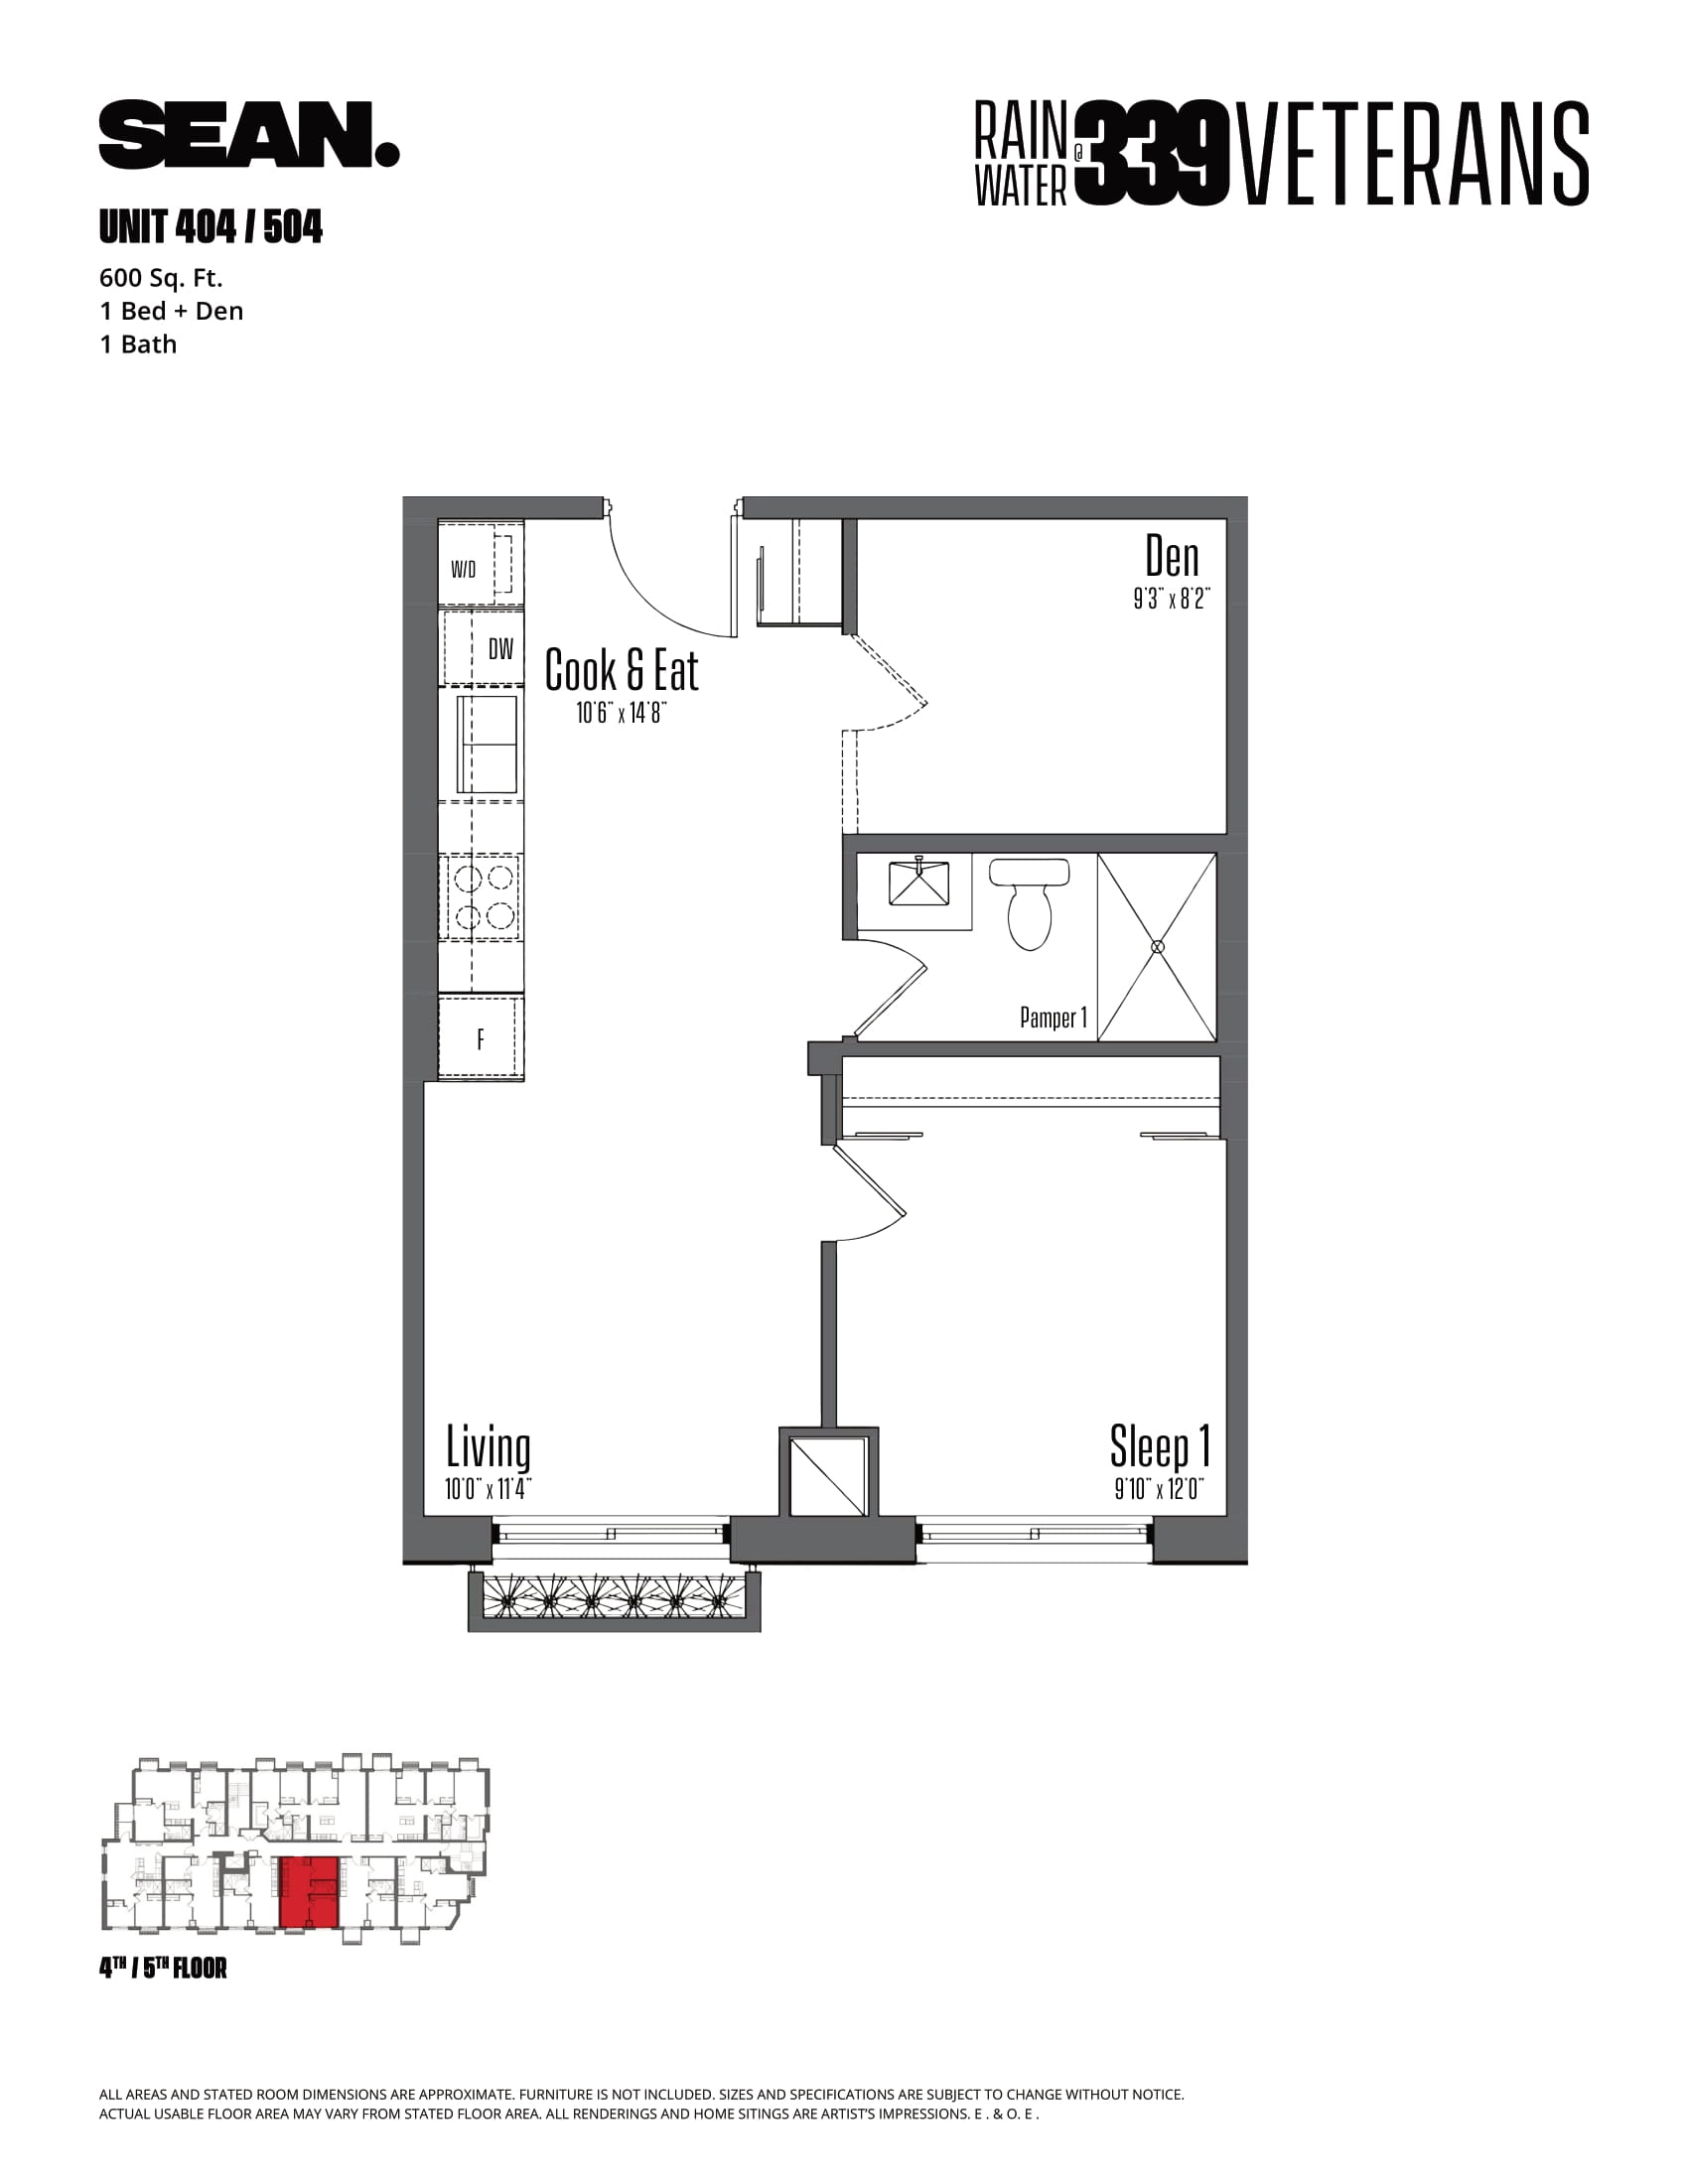  Floor Plan of Rainwater at 339 Veterans with undefined beds